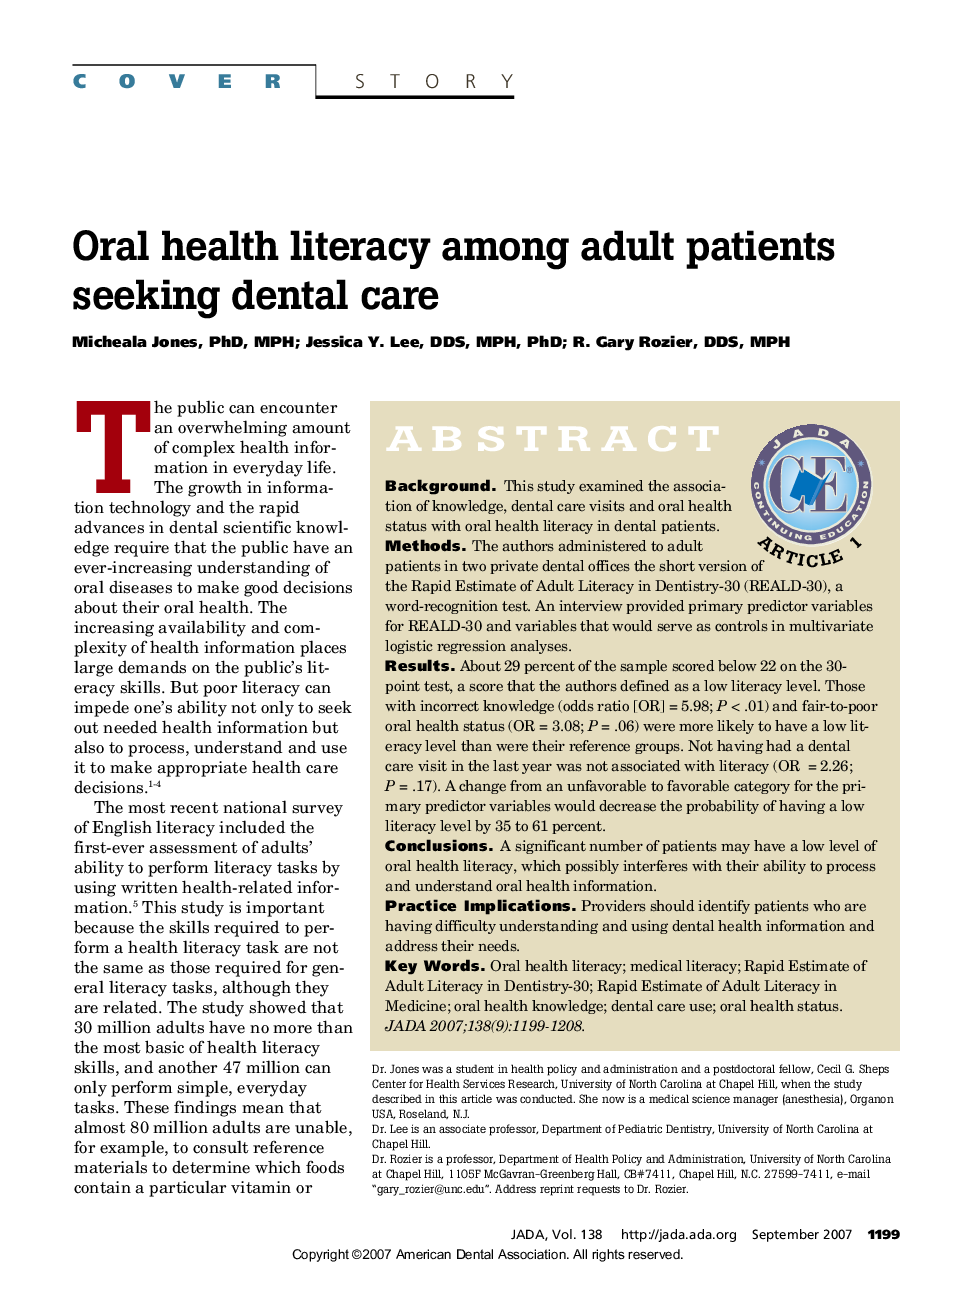 Oral Health Literacy Among Adult Patients Seeking Dental Care 